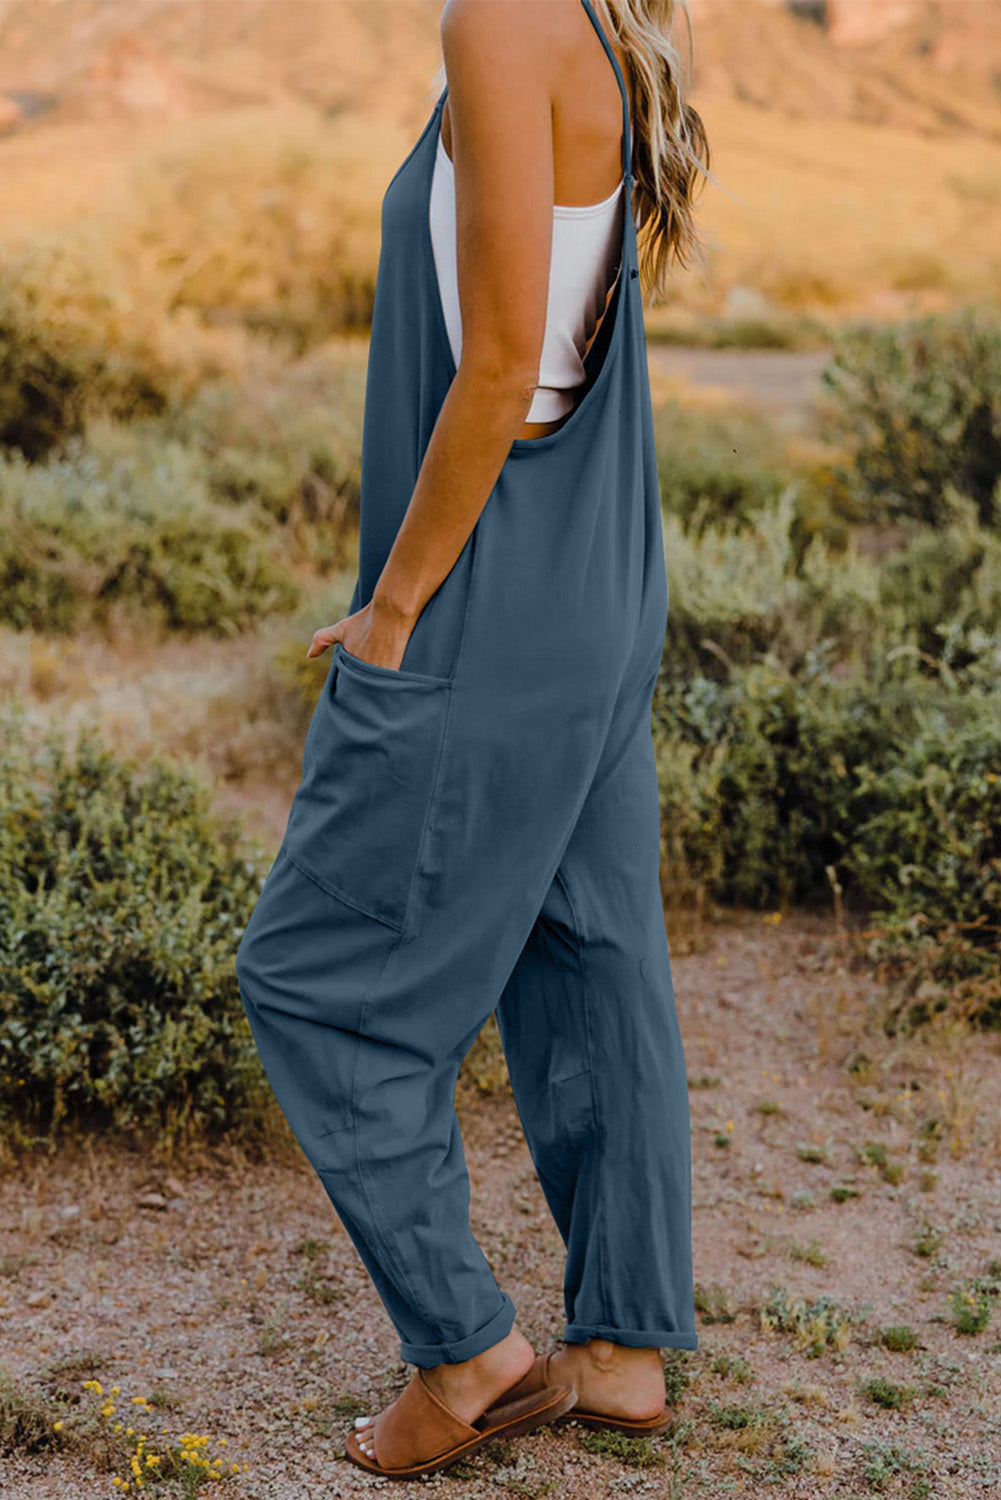 V-Neck Sleeveless Jumpsuit with Pocket Print on any thing USA/STOD clothes